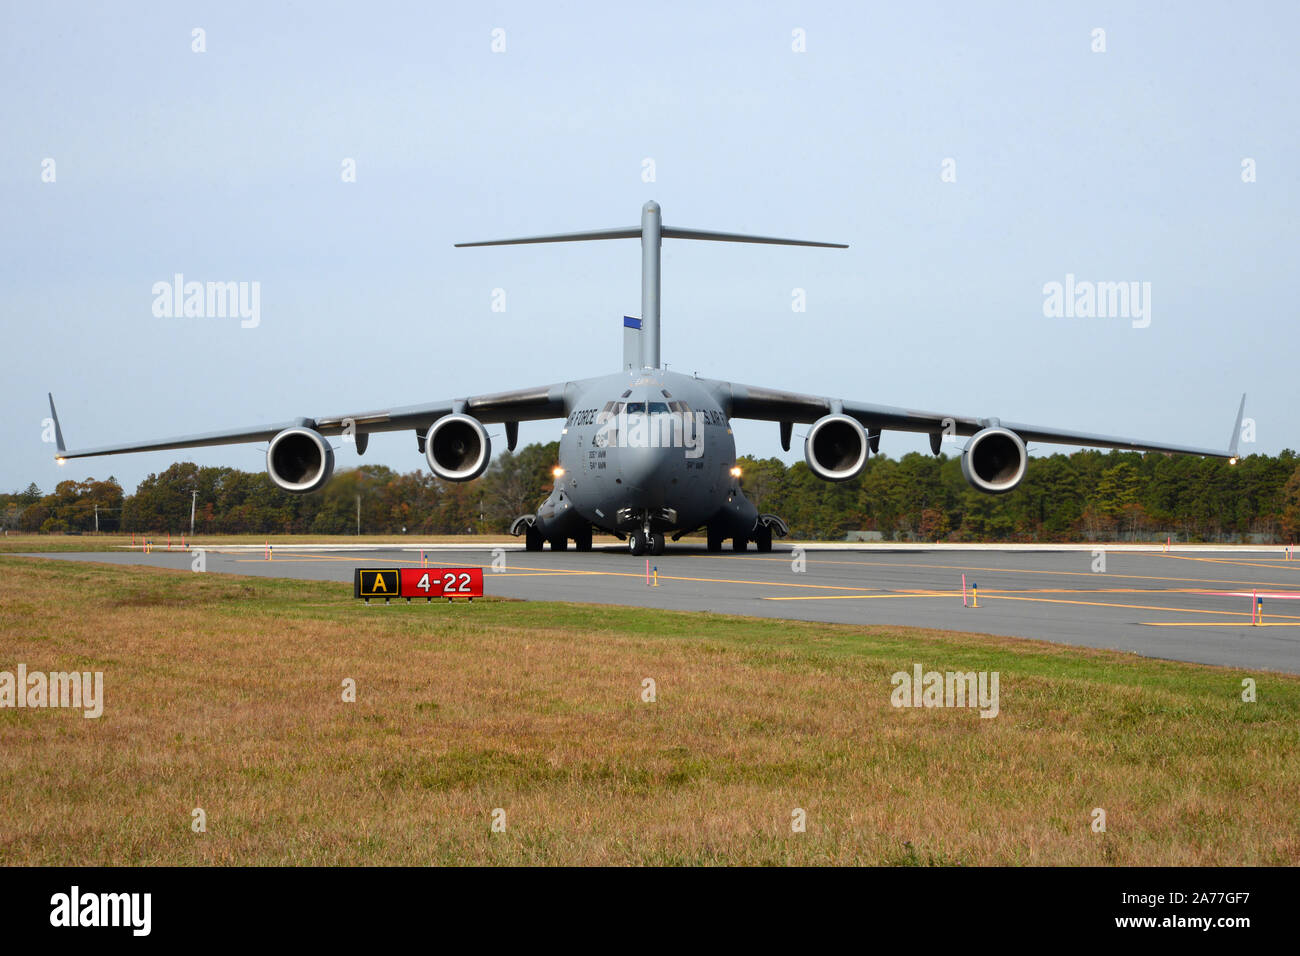 U.S. Air Force C-17 Globemaster III, from the 6th Airlift Squadron out of Joint Base McGuire-Dix-Lakehurst, exits the taxiway onto the Atlantic City Air National Guard Base, New Jersey, during a training exercise October 25, 2019. Exercise Operation Jersey Shield is designed to evaluate and ensure mission readiness of the 177th Fighter Wing in support of worldwide deployment. (U.S. Air National Guard photo by Senior Master Sgt. Andrew J. Moseley) Stock Photo